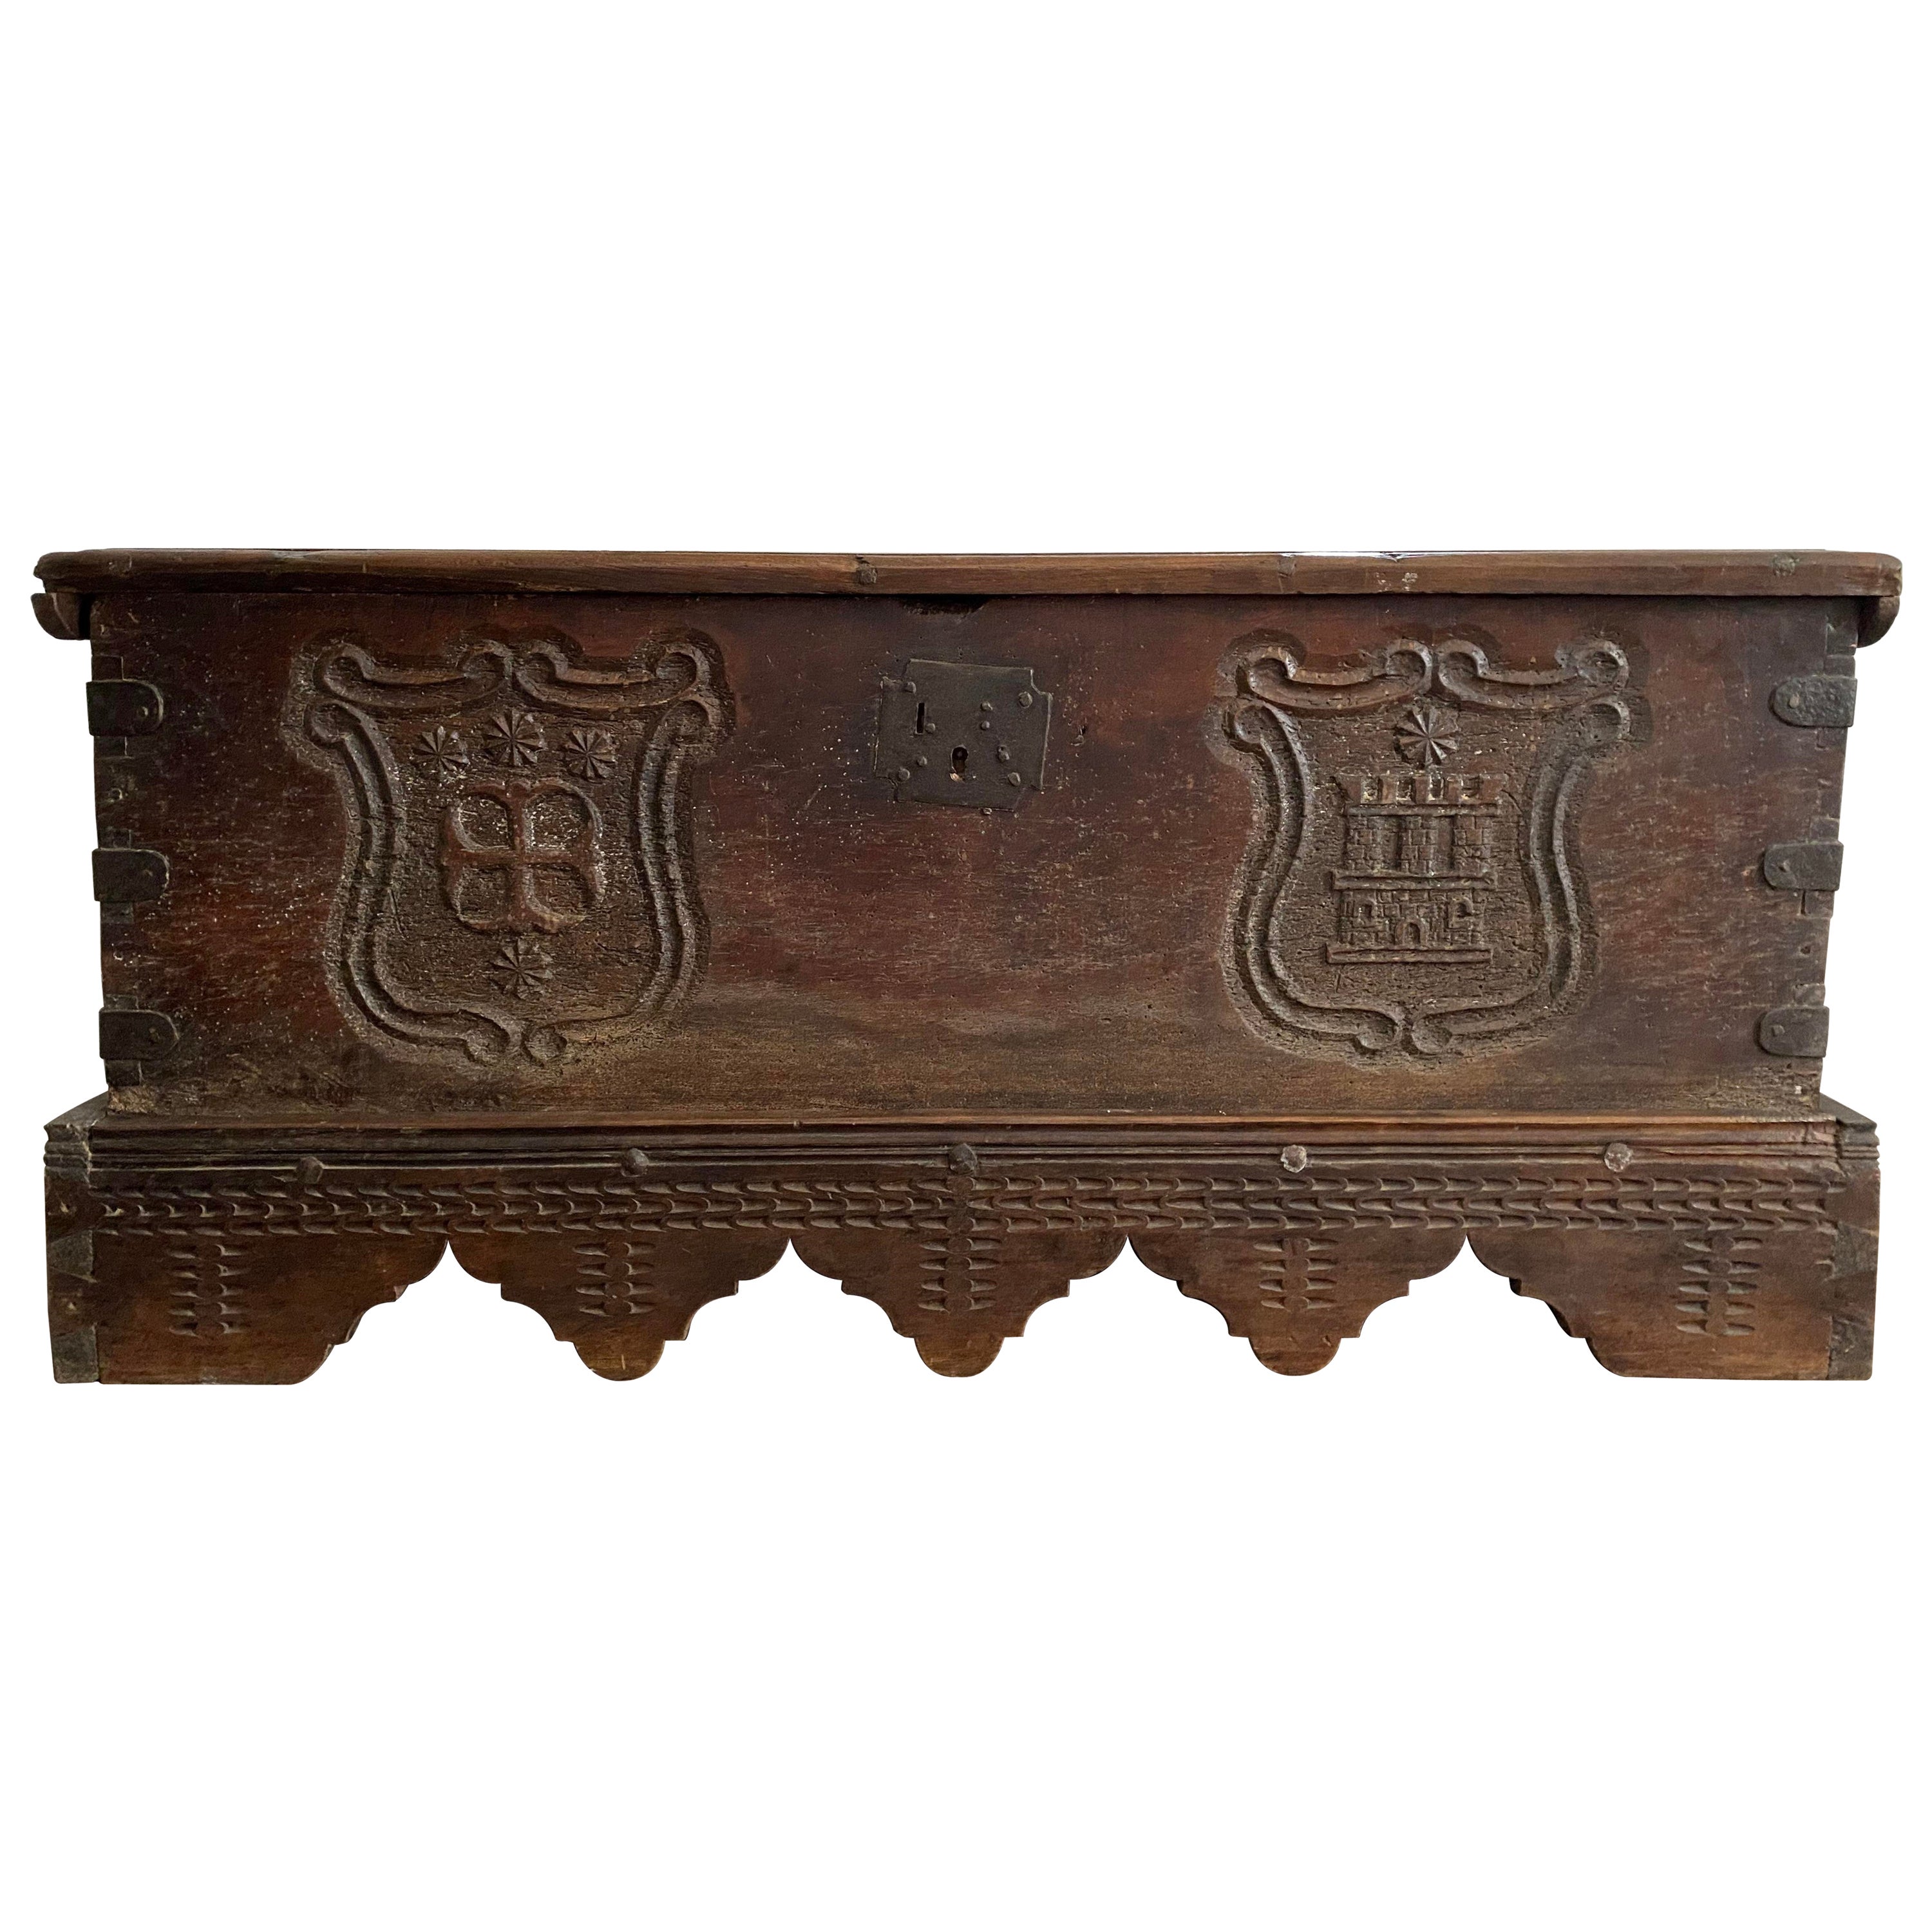 Wedding trunk / chest with coat of arms - Renaissance - 1600 For Sale